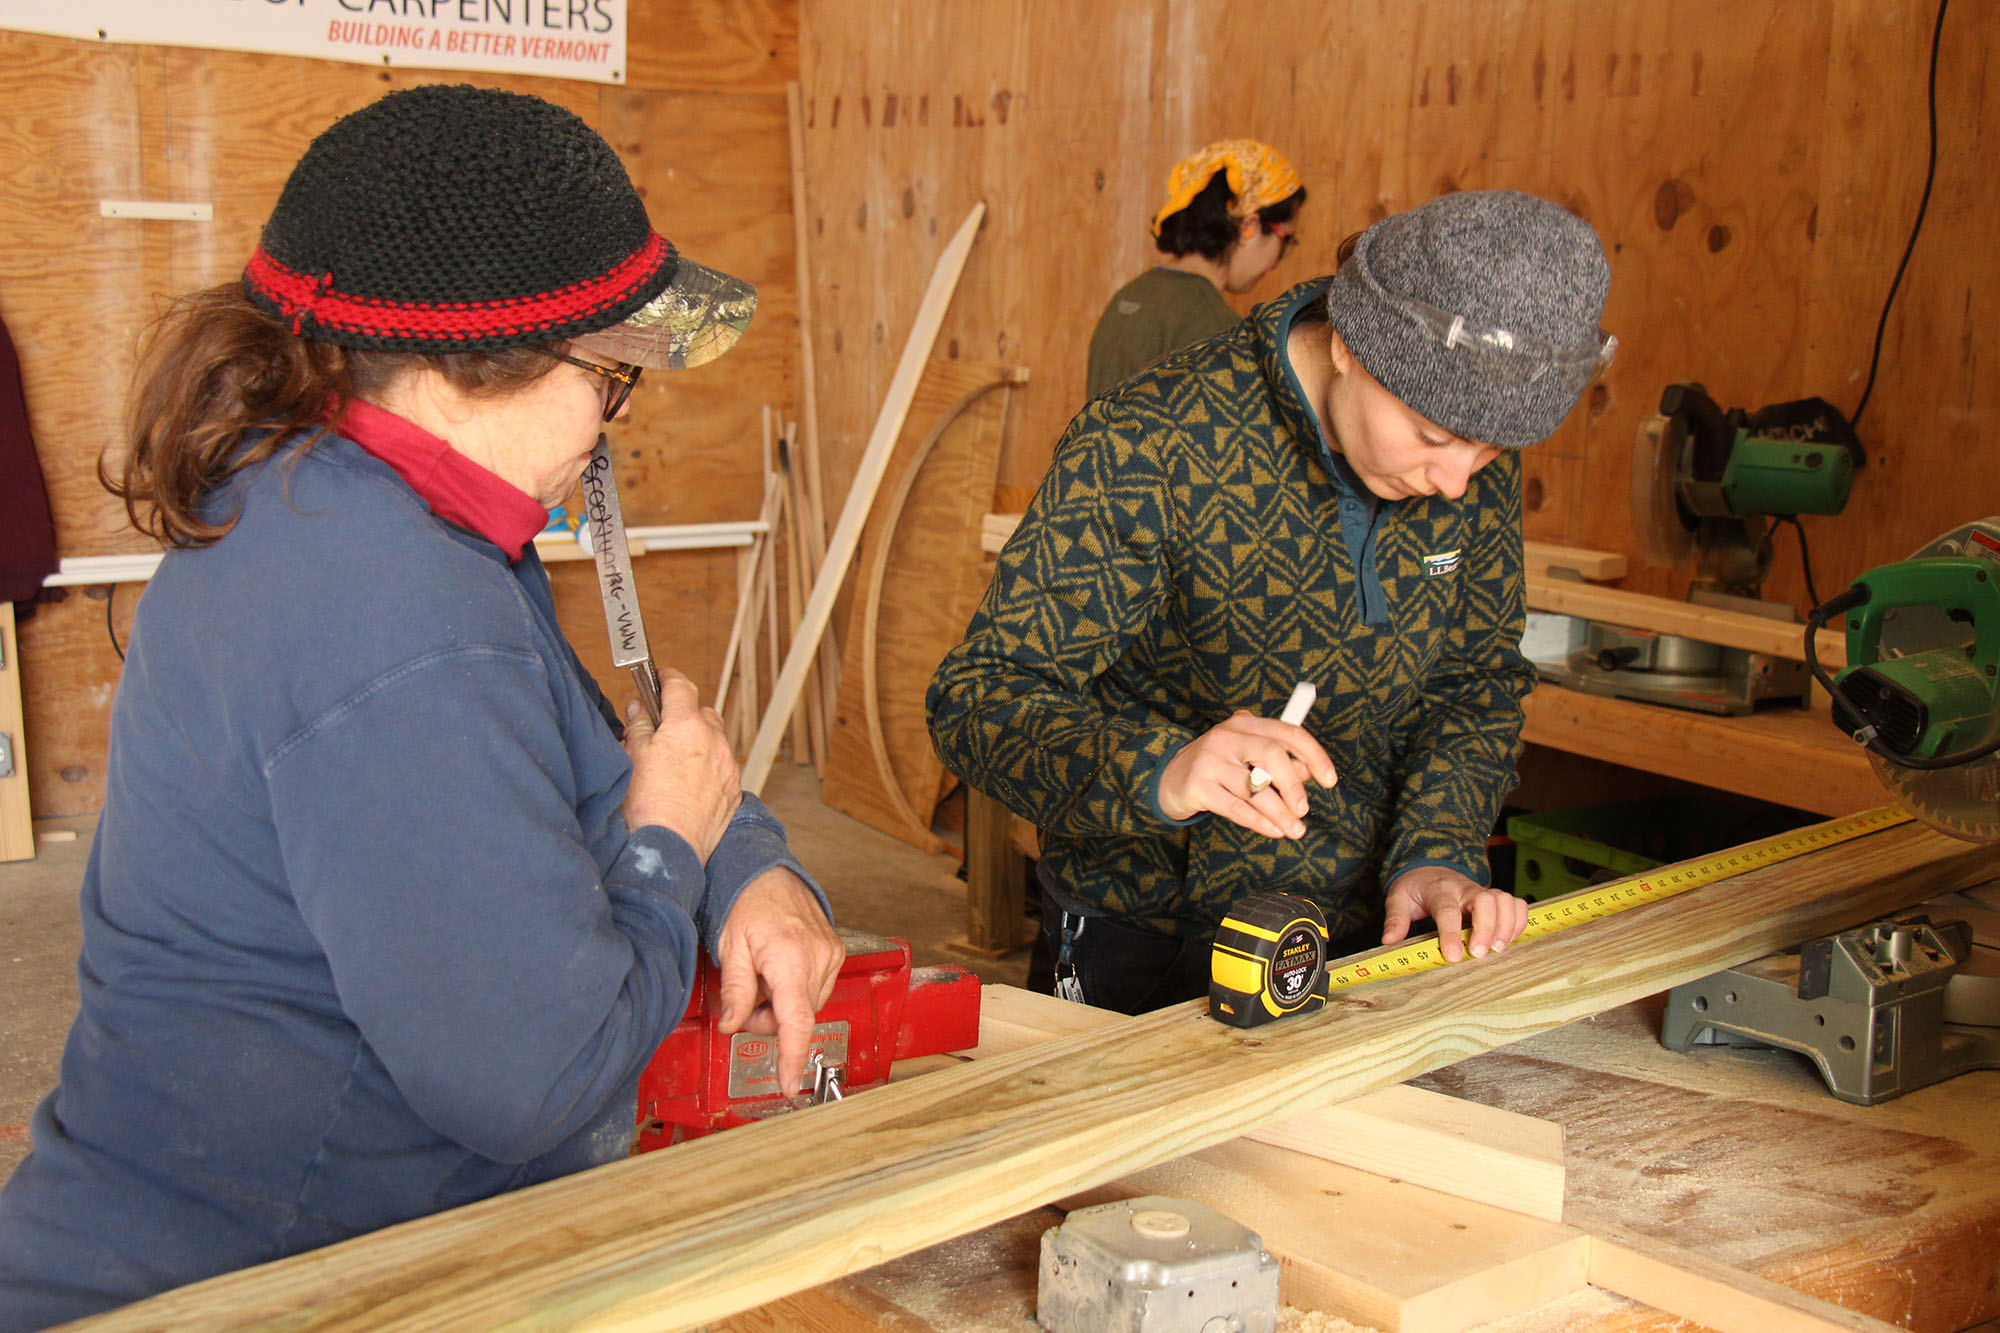 Two trailblazers measure the wood using a tape measure before making a cut with the saw.